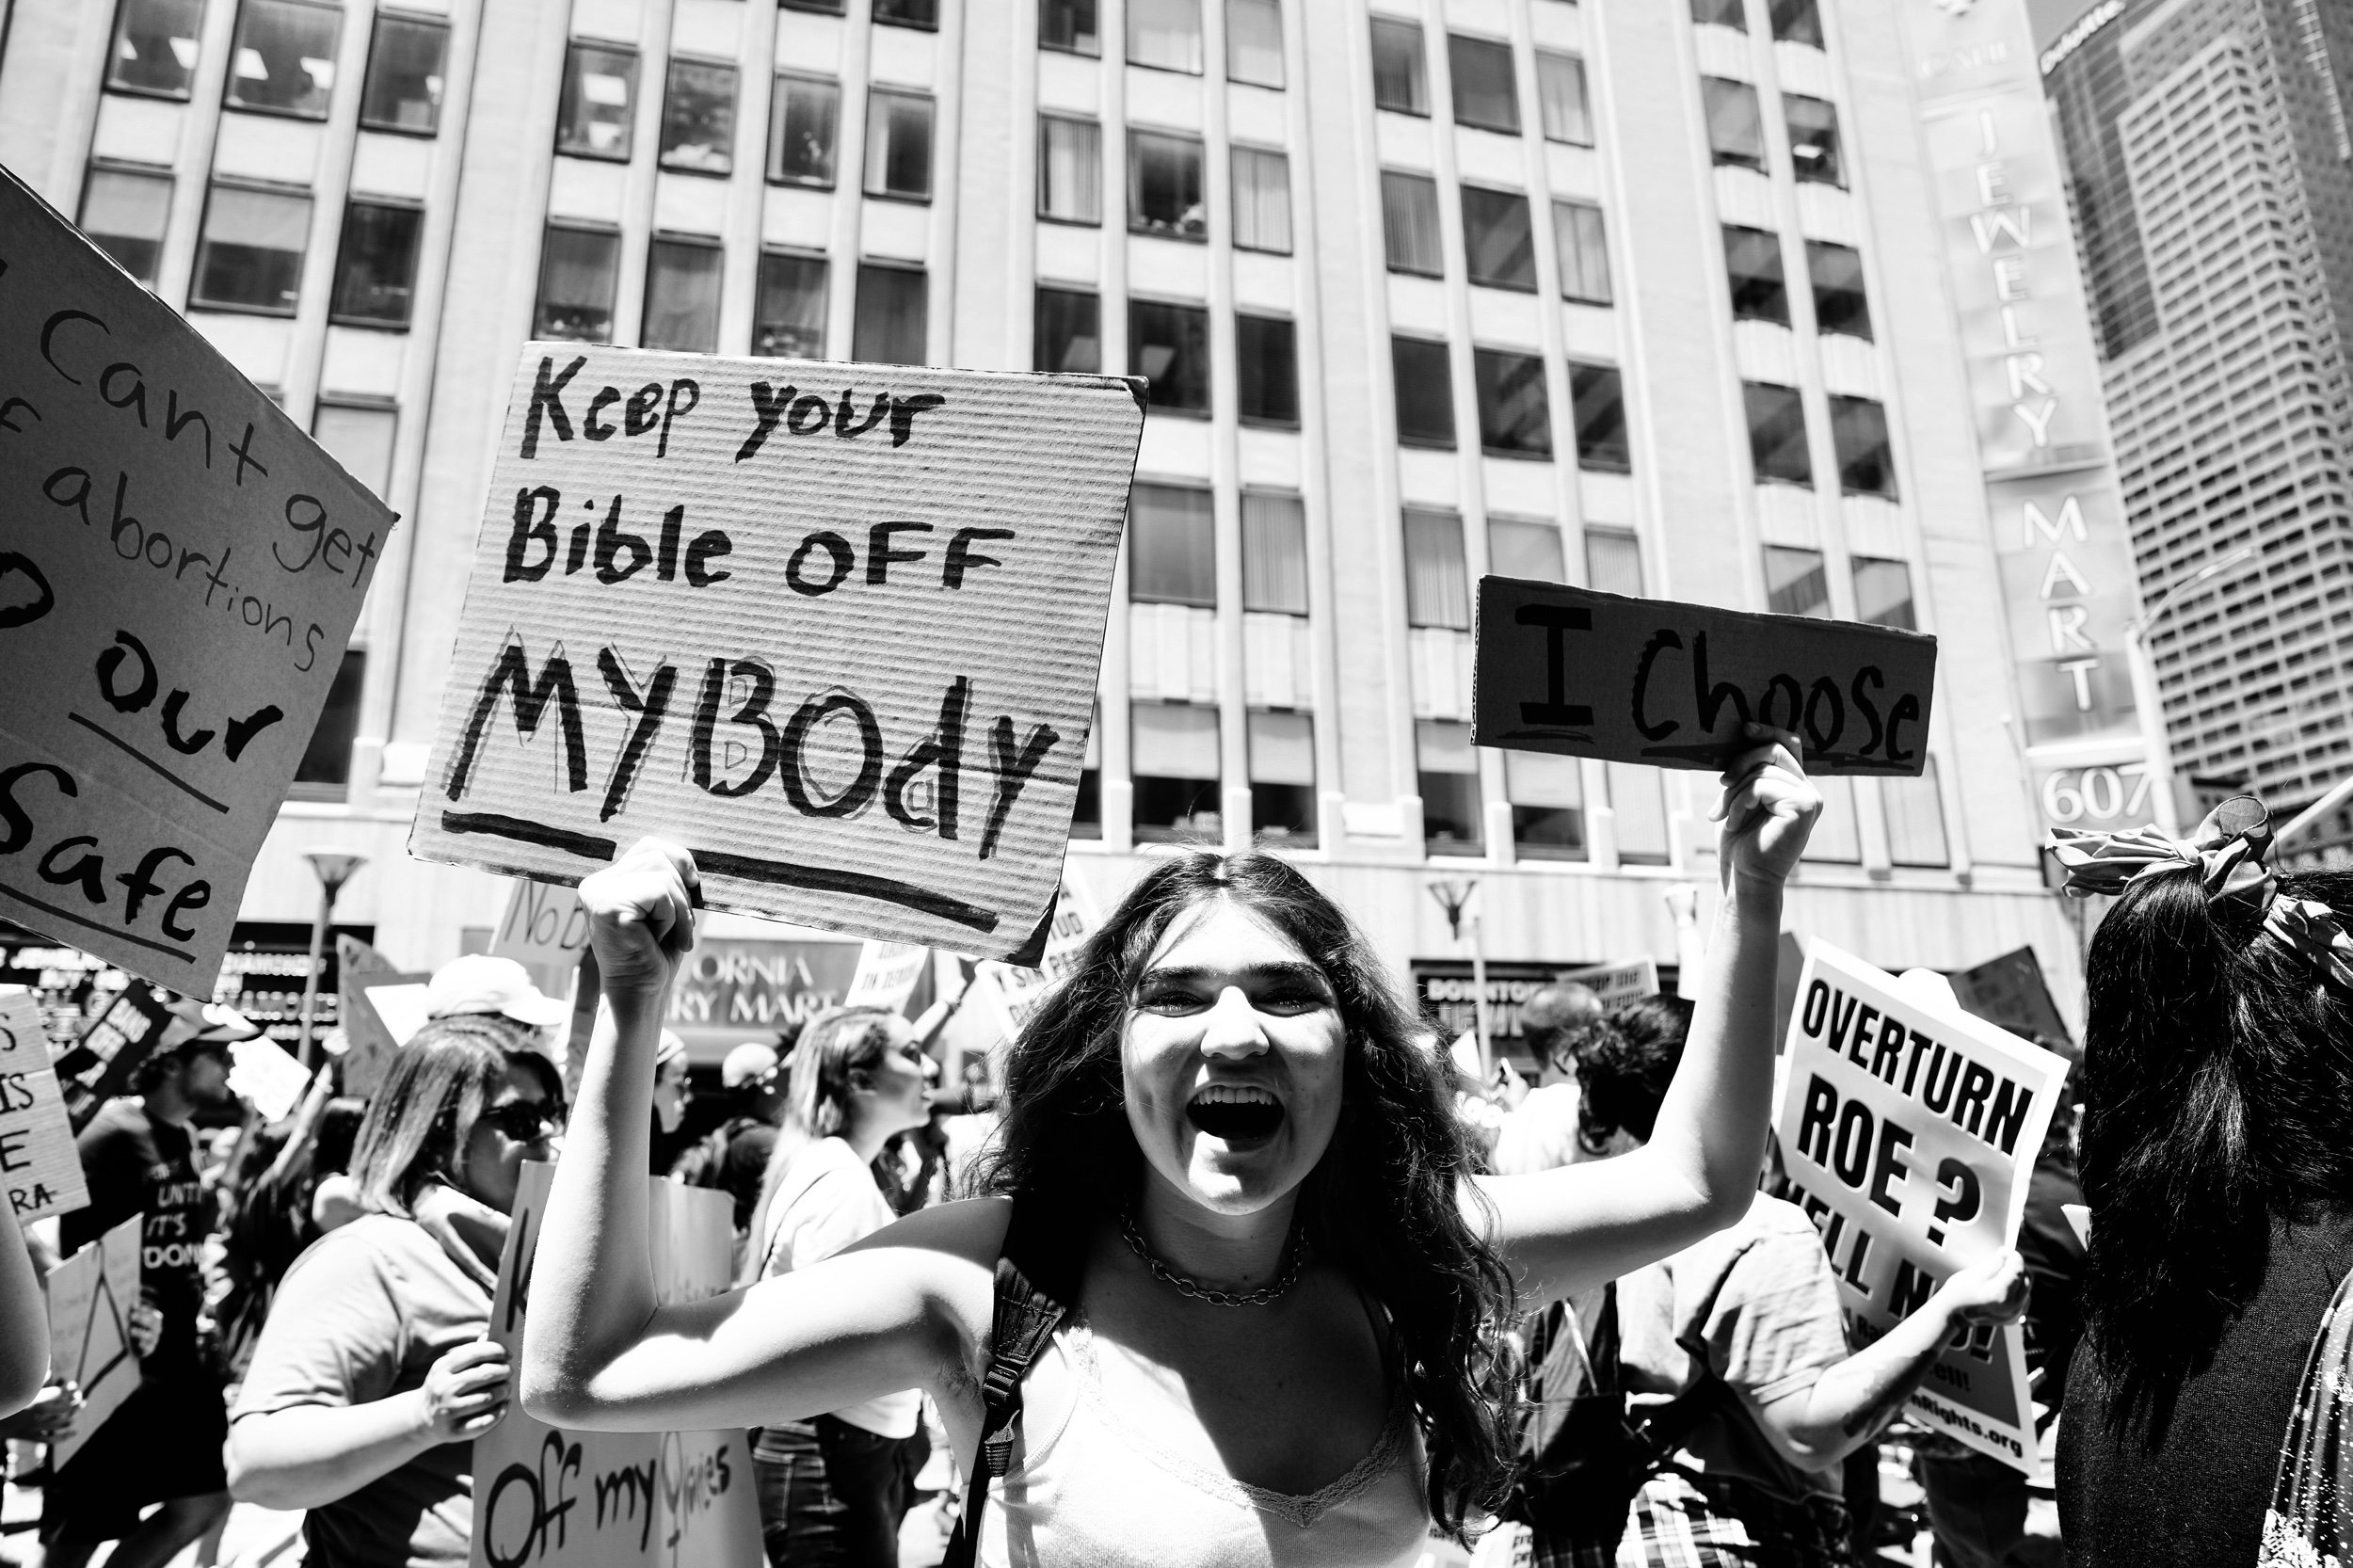  Protest in downtown Los Angeles, after the supreme court’s decision to overturn Roe v Wade was leaked. 2022. 